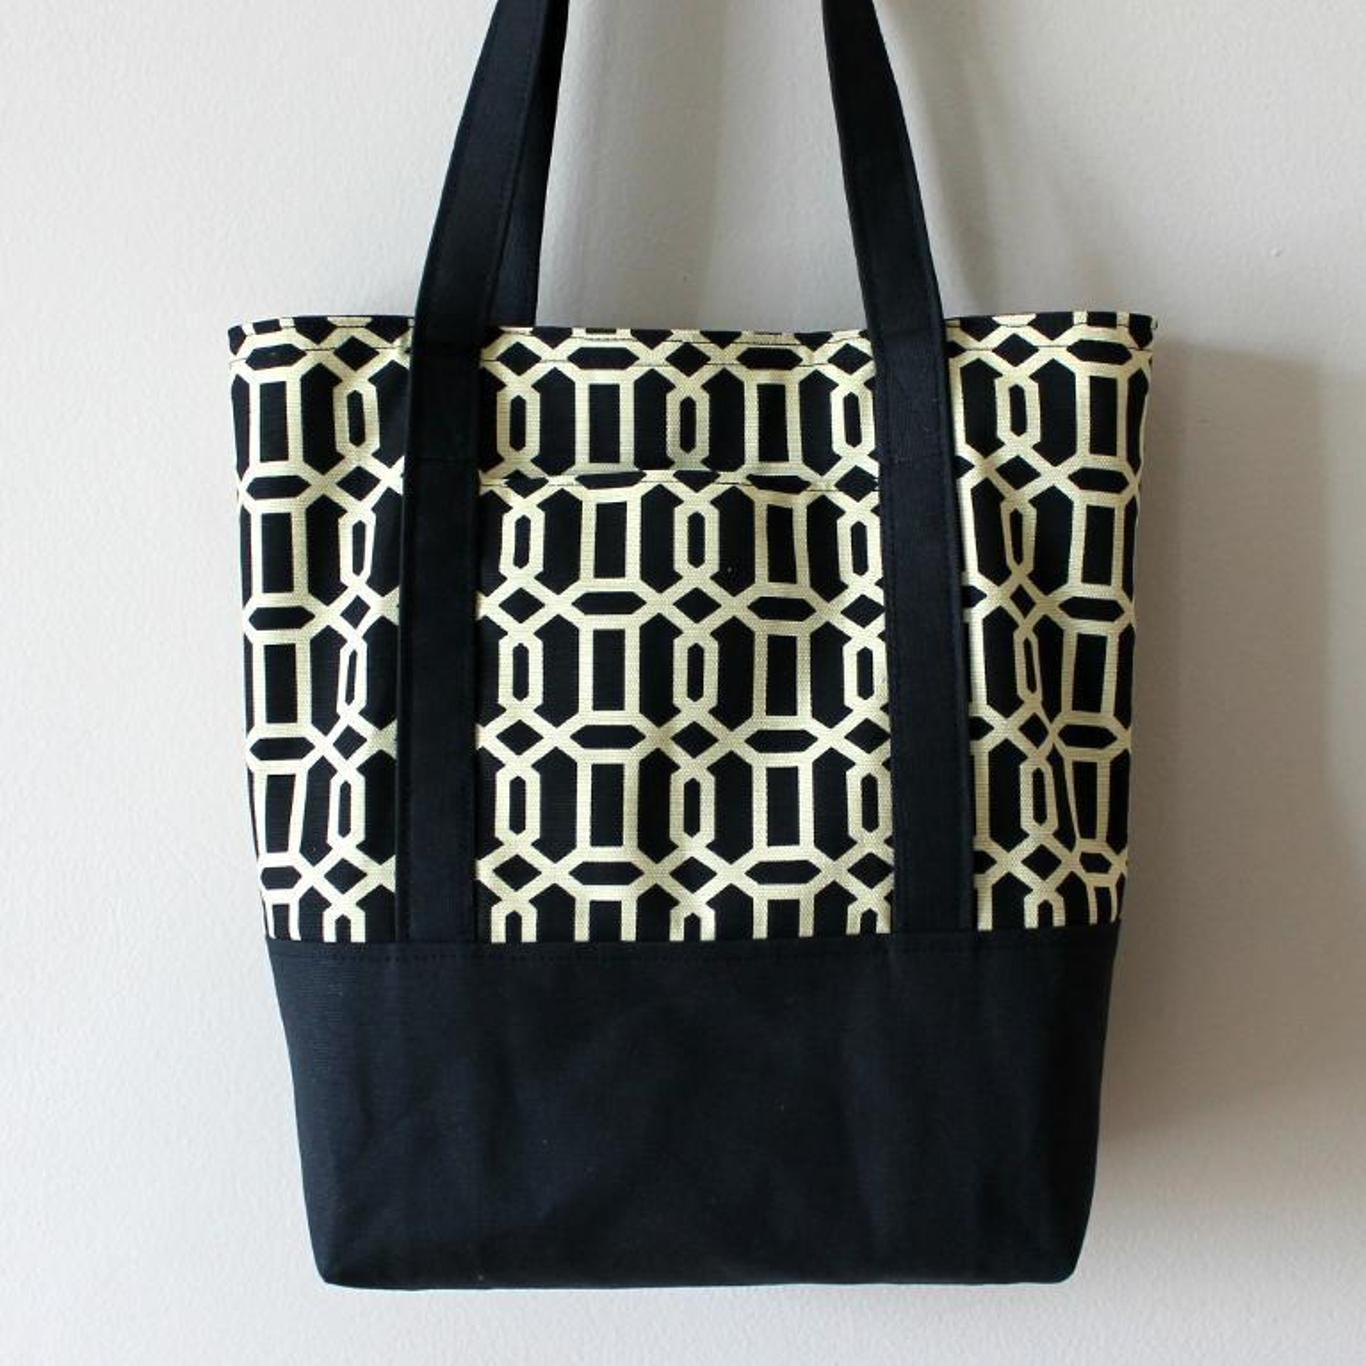 free-pattern-alert-20-handbags-and-purses-on-the-cutting-floor